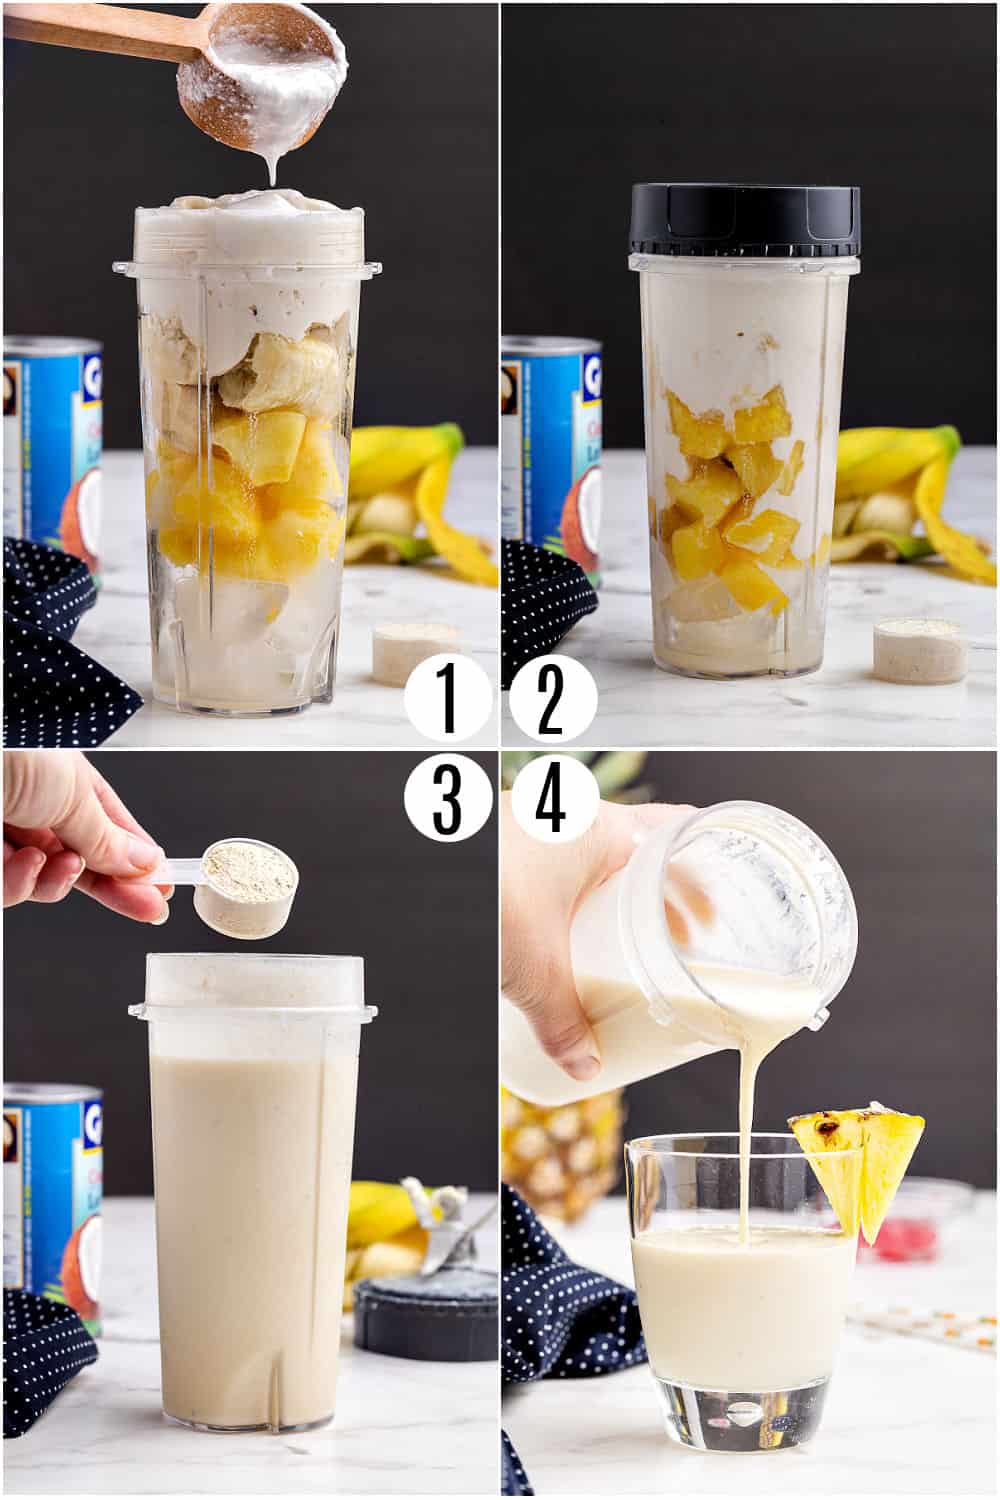 Step by step photos showing how to make a pina colada smoothie.